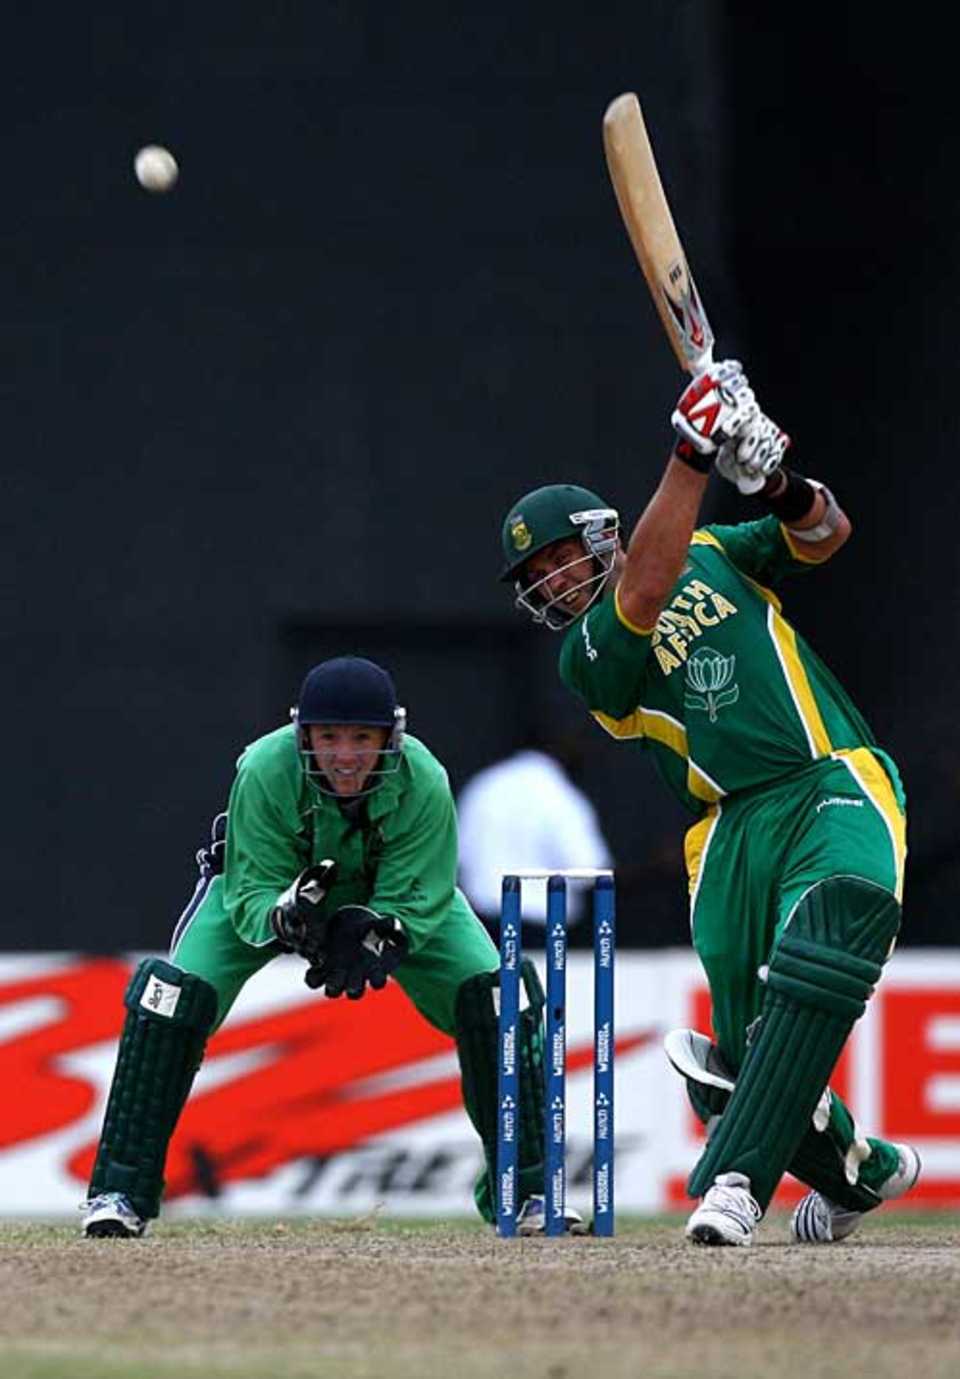 Jacques Kallis steps and goes over mid off during his unbeaten 66, Ireland v South Africa, Guyana, April 3, 2007